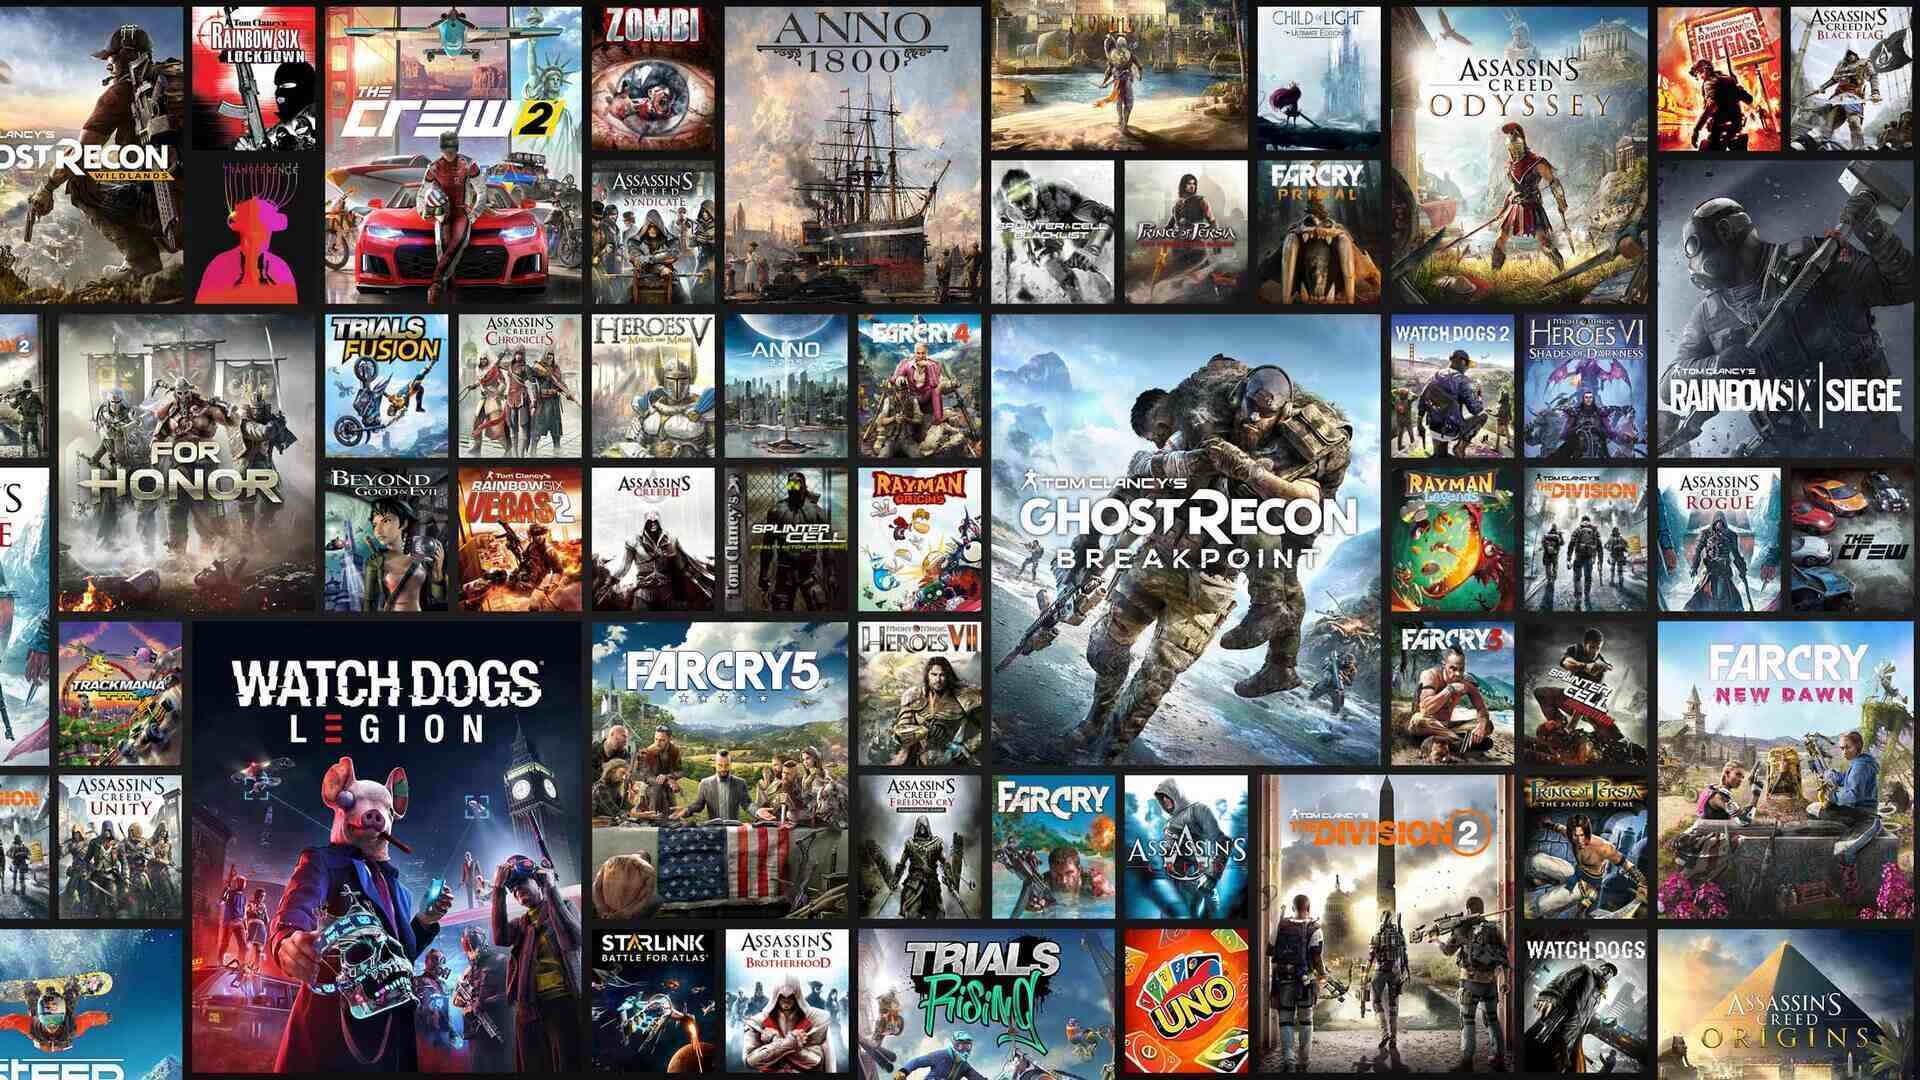 Best Free Cross Platform Games - 14 Great Games and Reviews